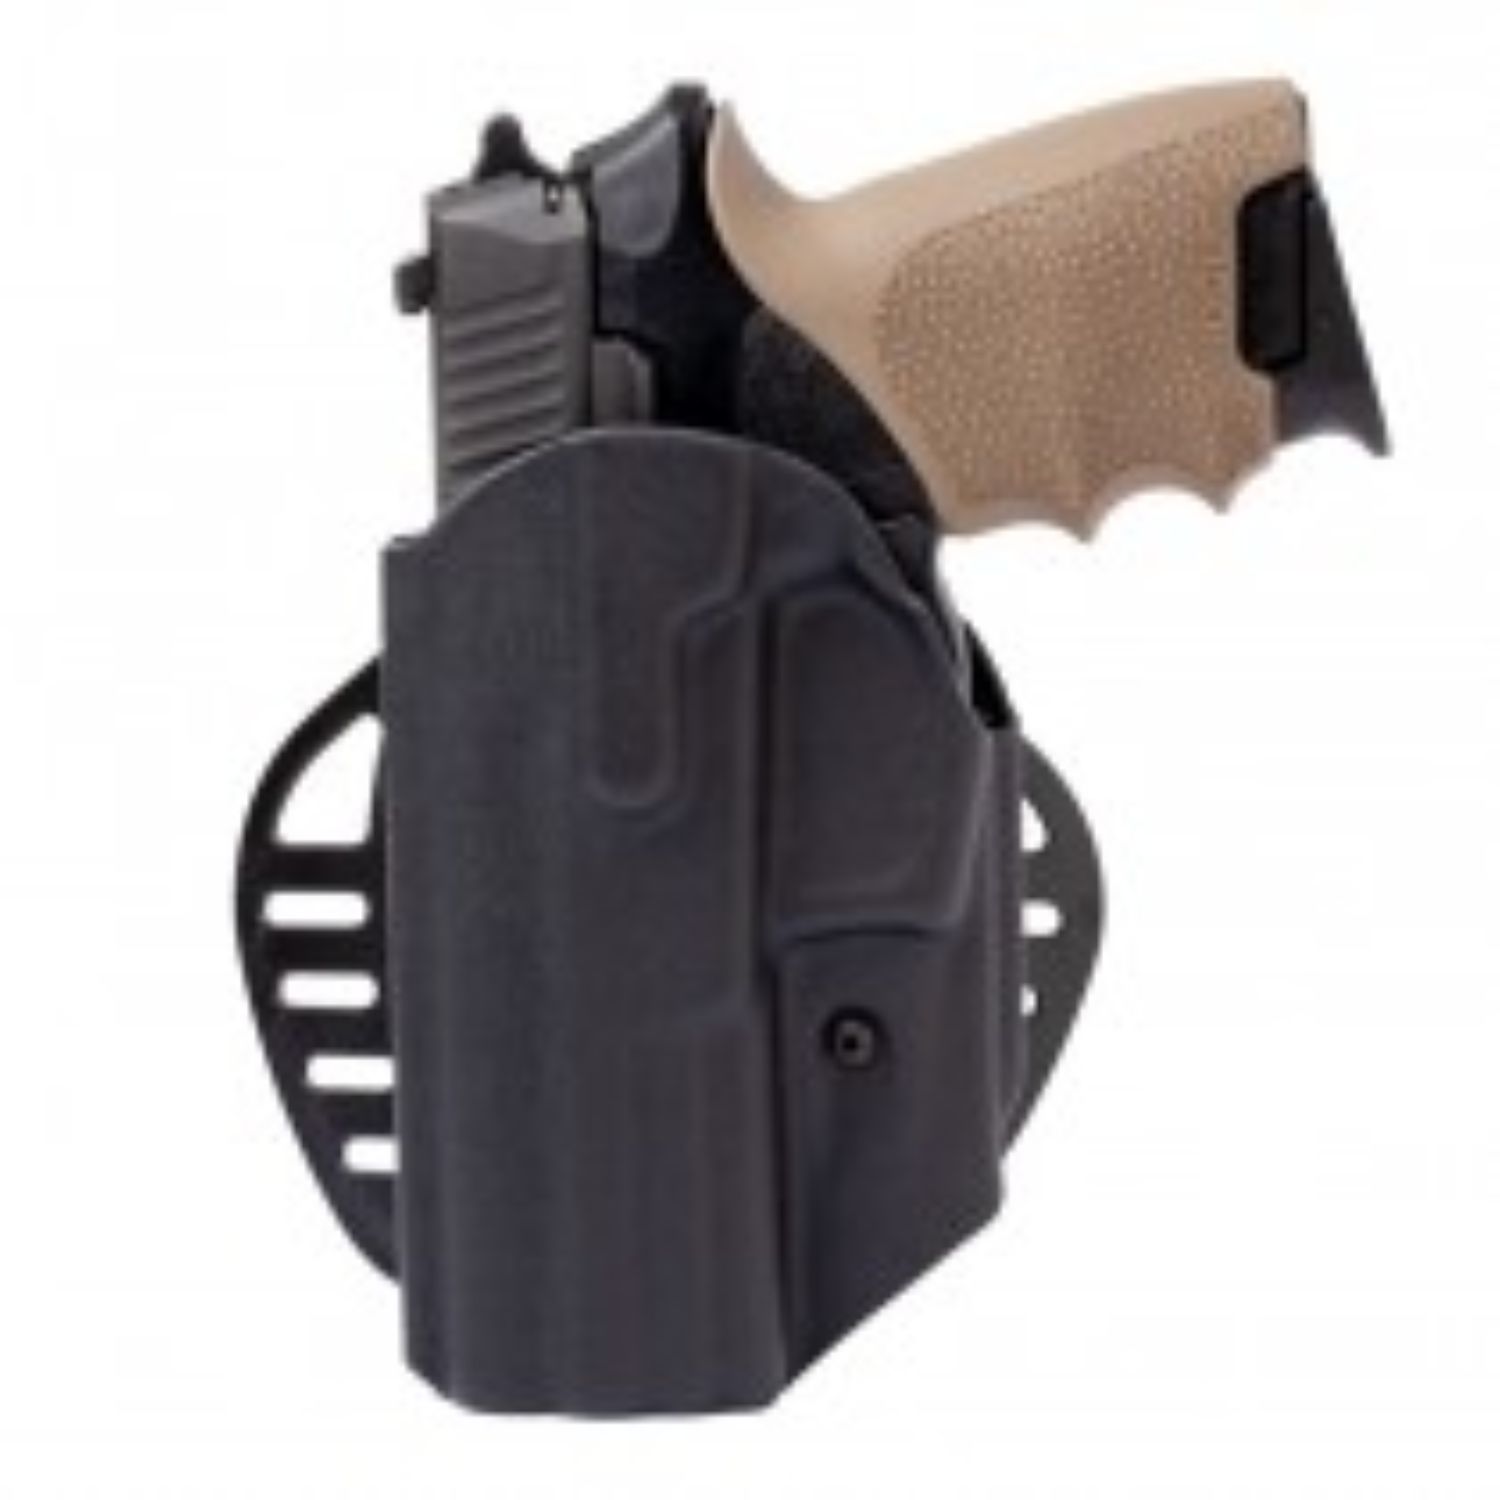 Hogue ARS Stage 1 Carry Holster Sig Sauer P229 LH Black